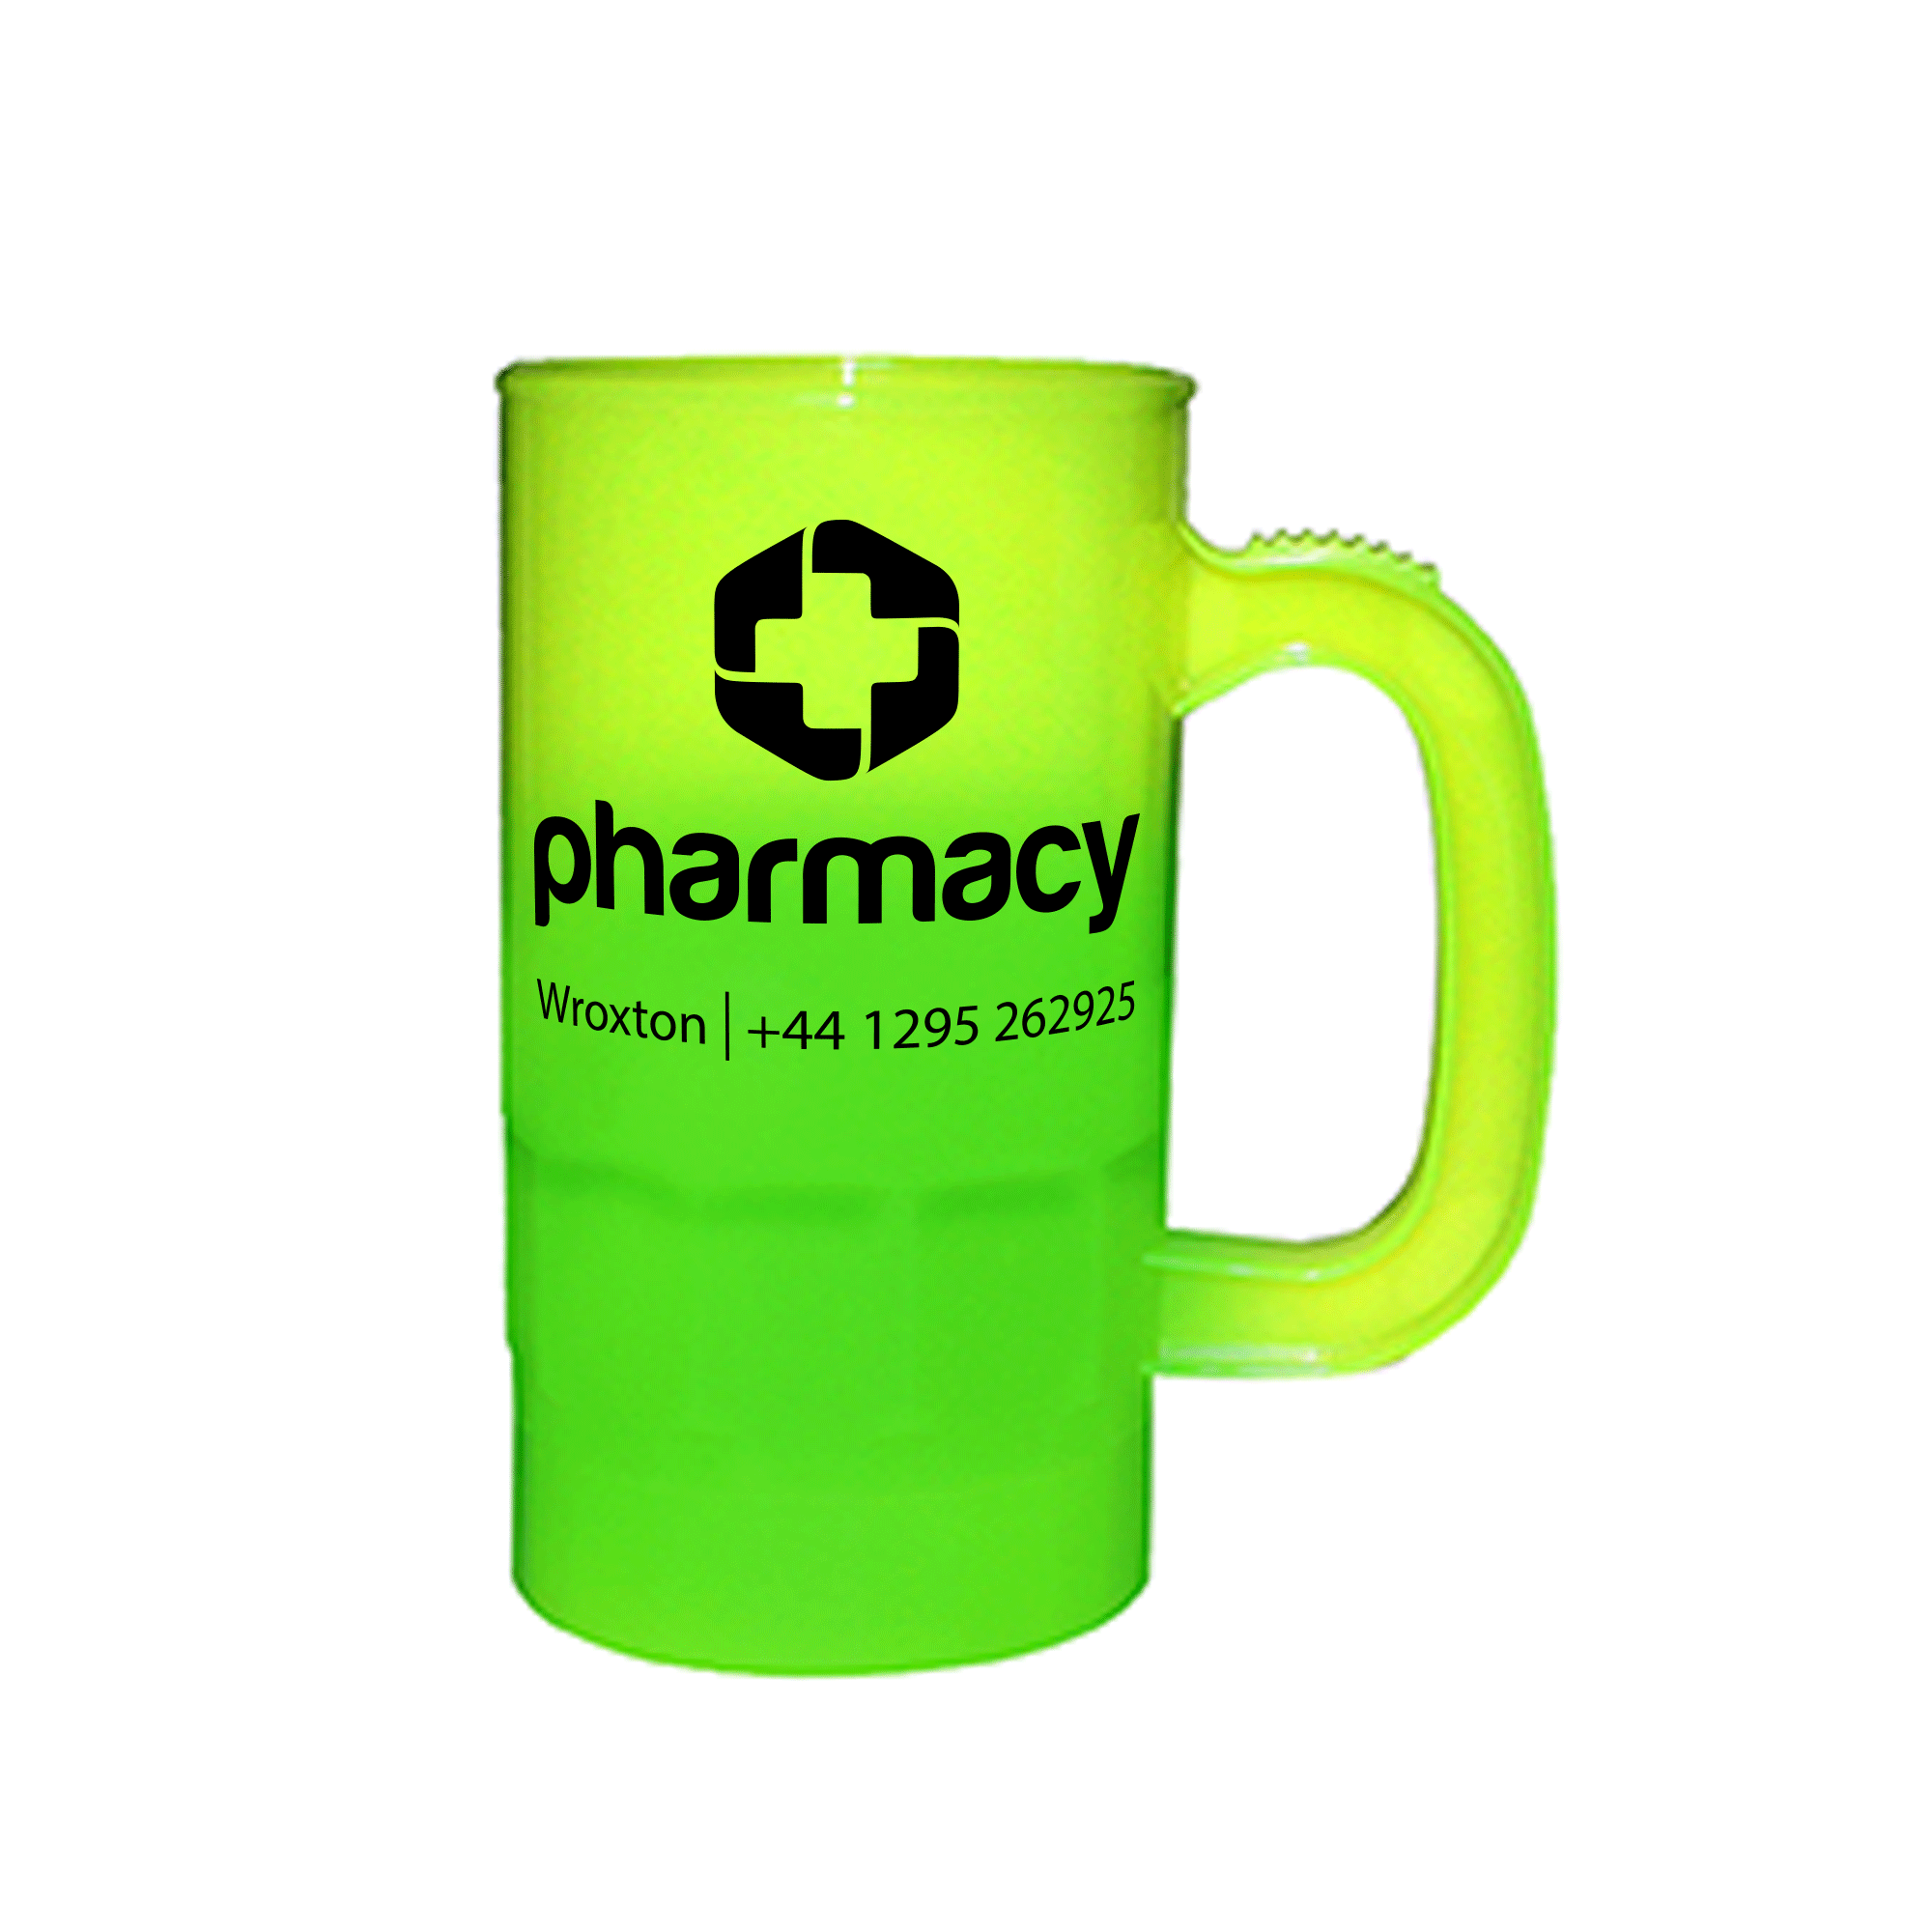 Logo Color Changing 22 Oz Cups 2 Pack Green Re